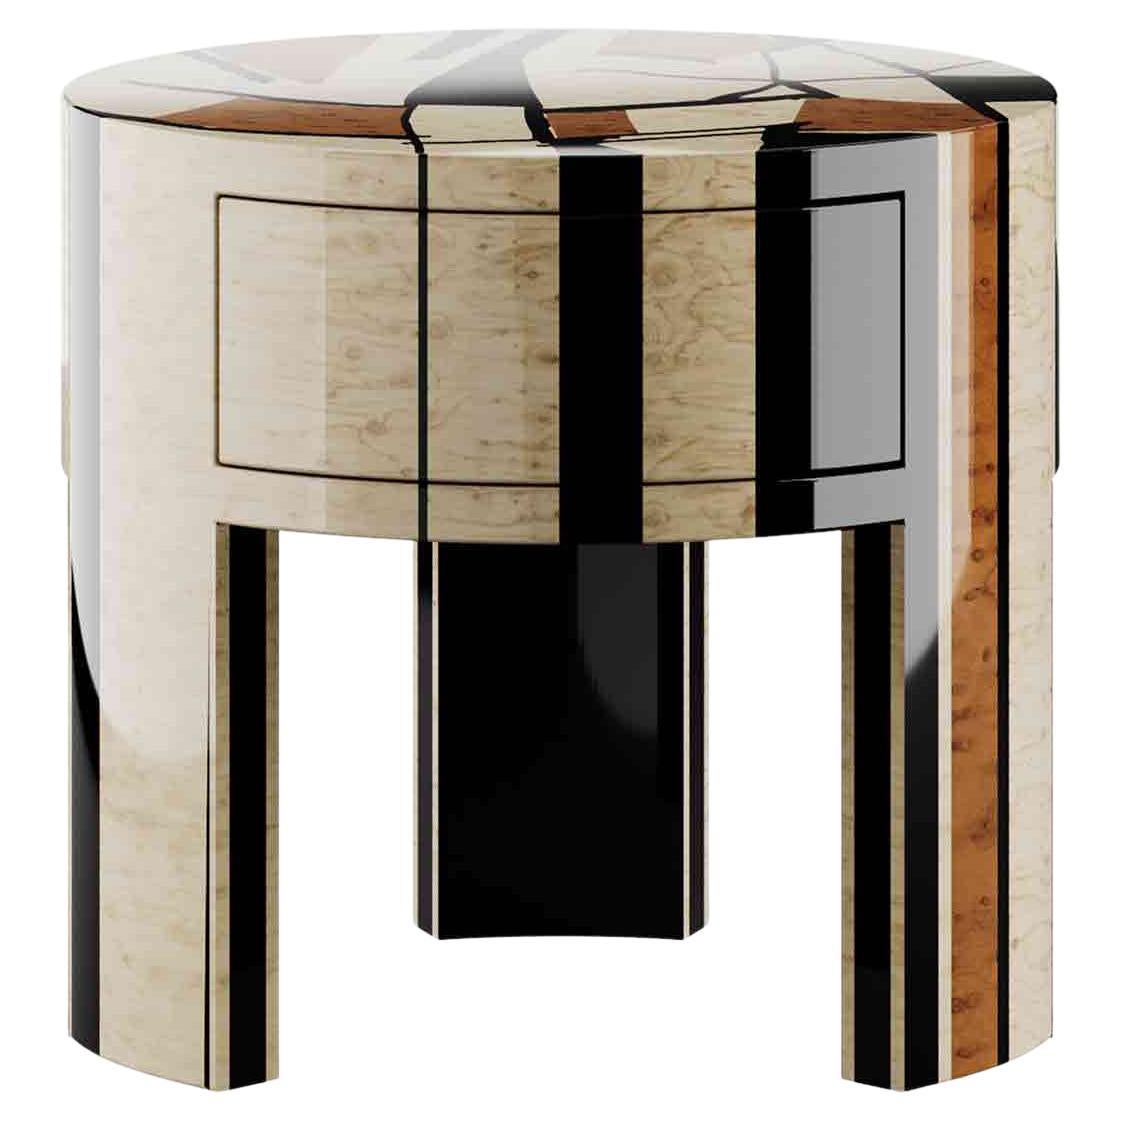 Austria Bedside Table is the perfect choice for a luxury bedroom design. A modern nightstand table made in marquetry and can be customized to meet your style and favorite wood colors.

Materials: Body in Marquetry Gloss White Toulipier; Black Bird